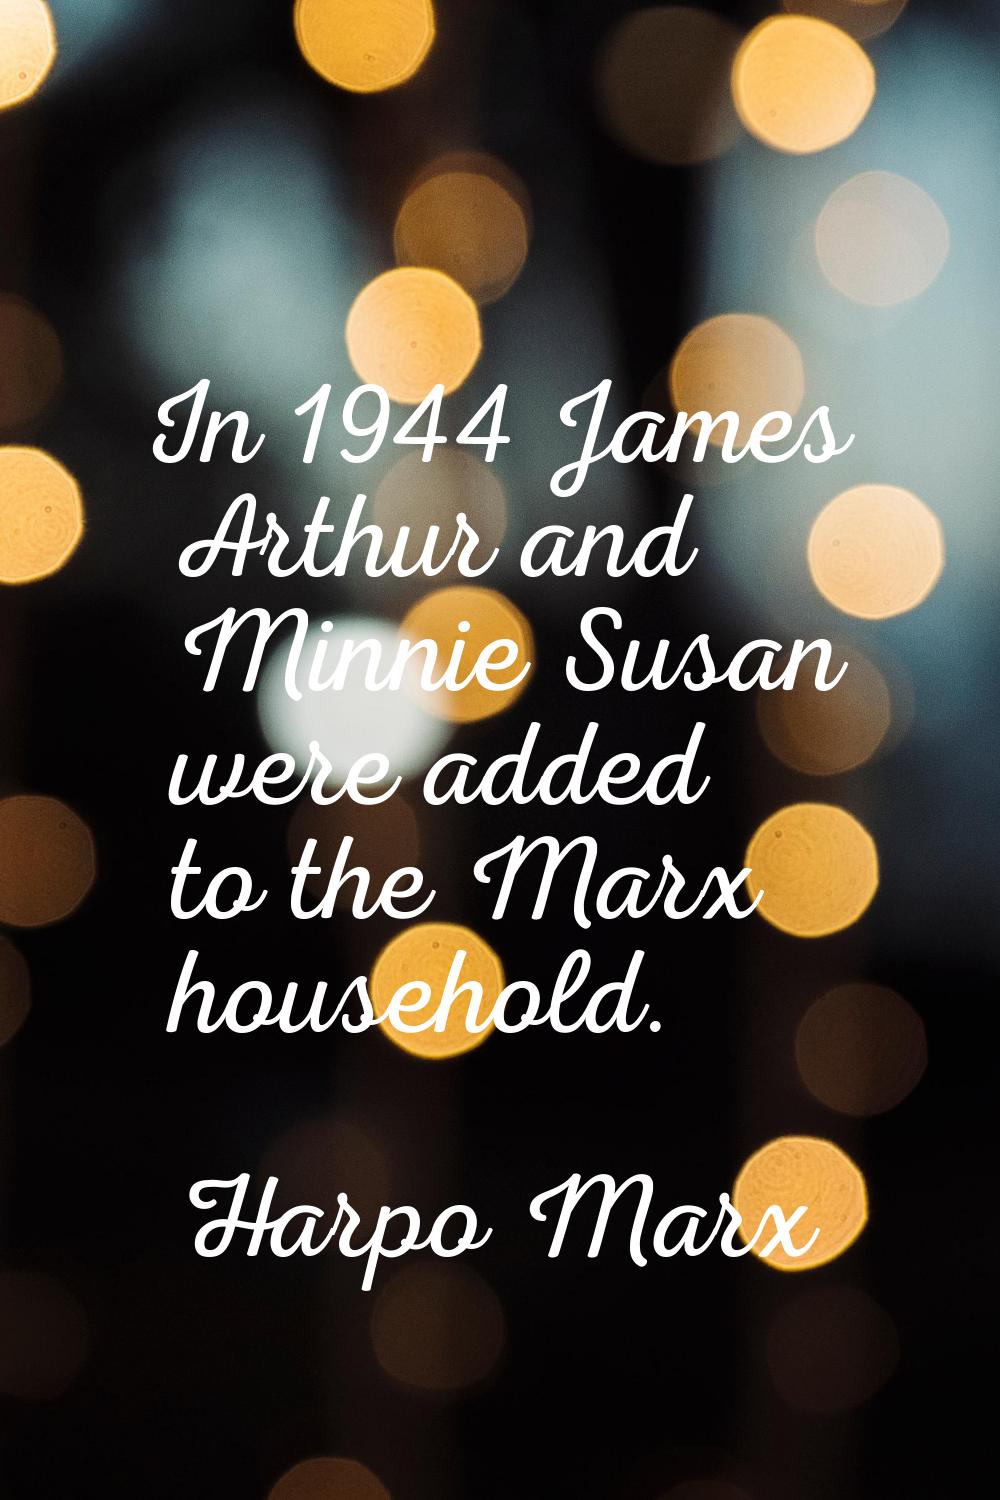 In 1944 James Arthur and Minnie Susan were added to the Marx household.